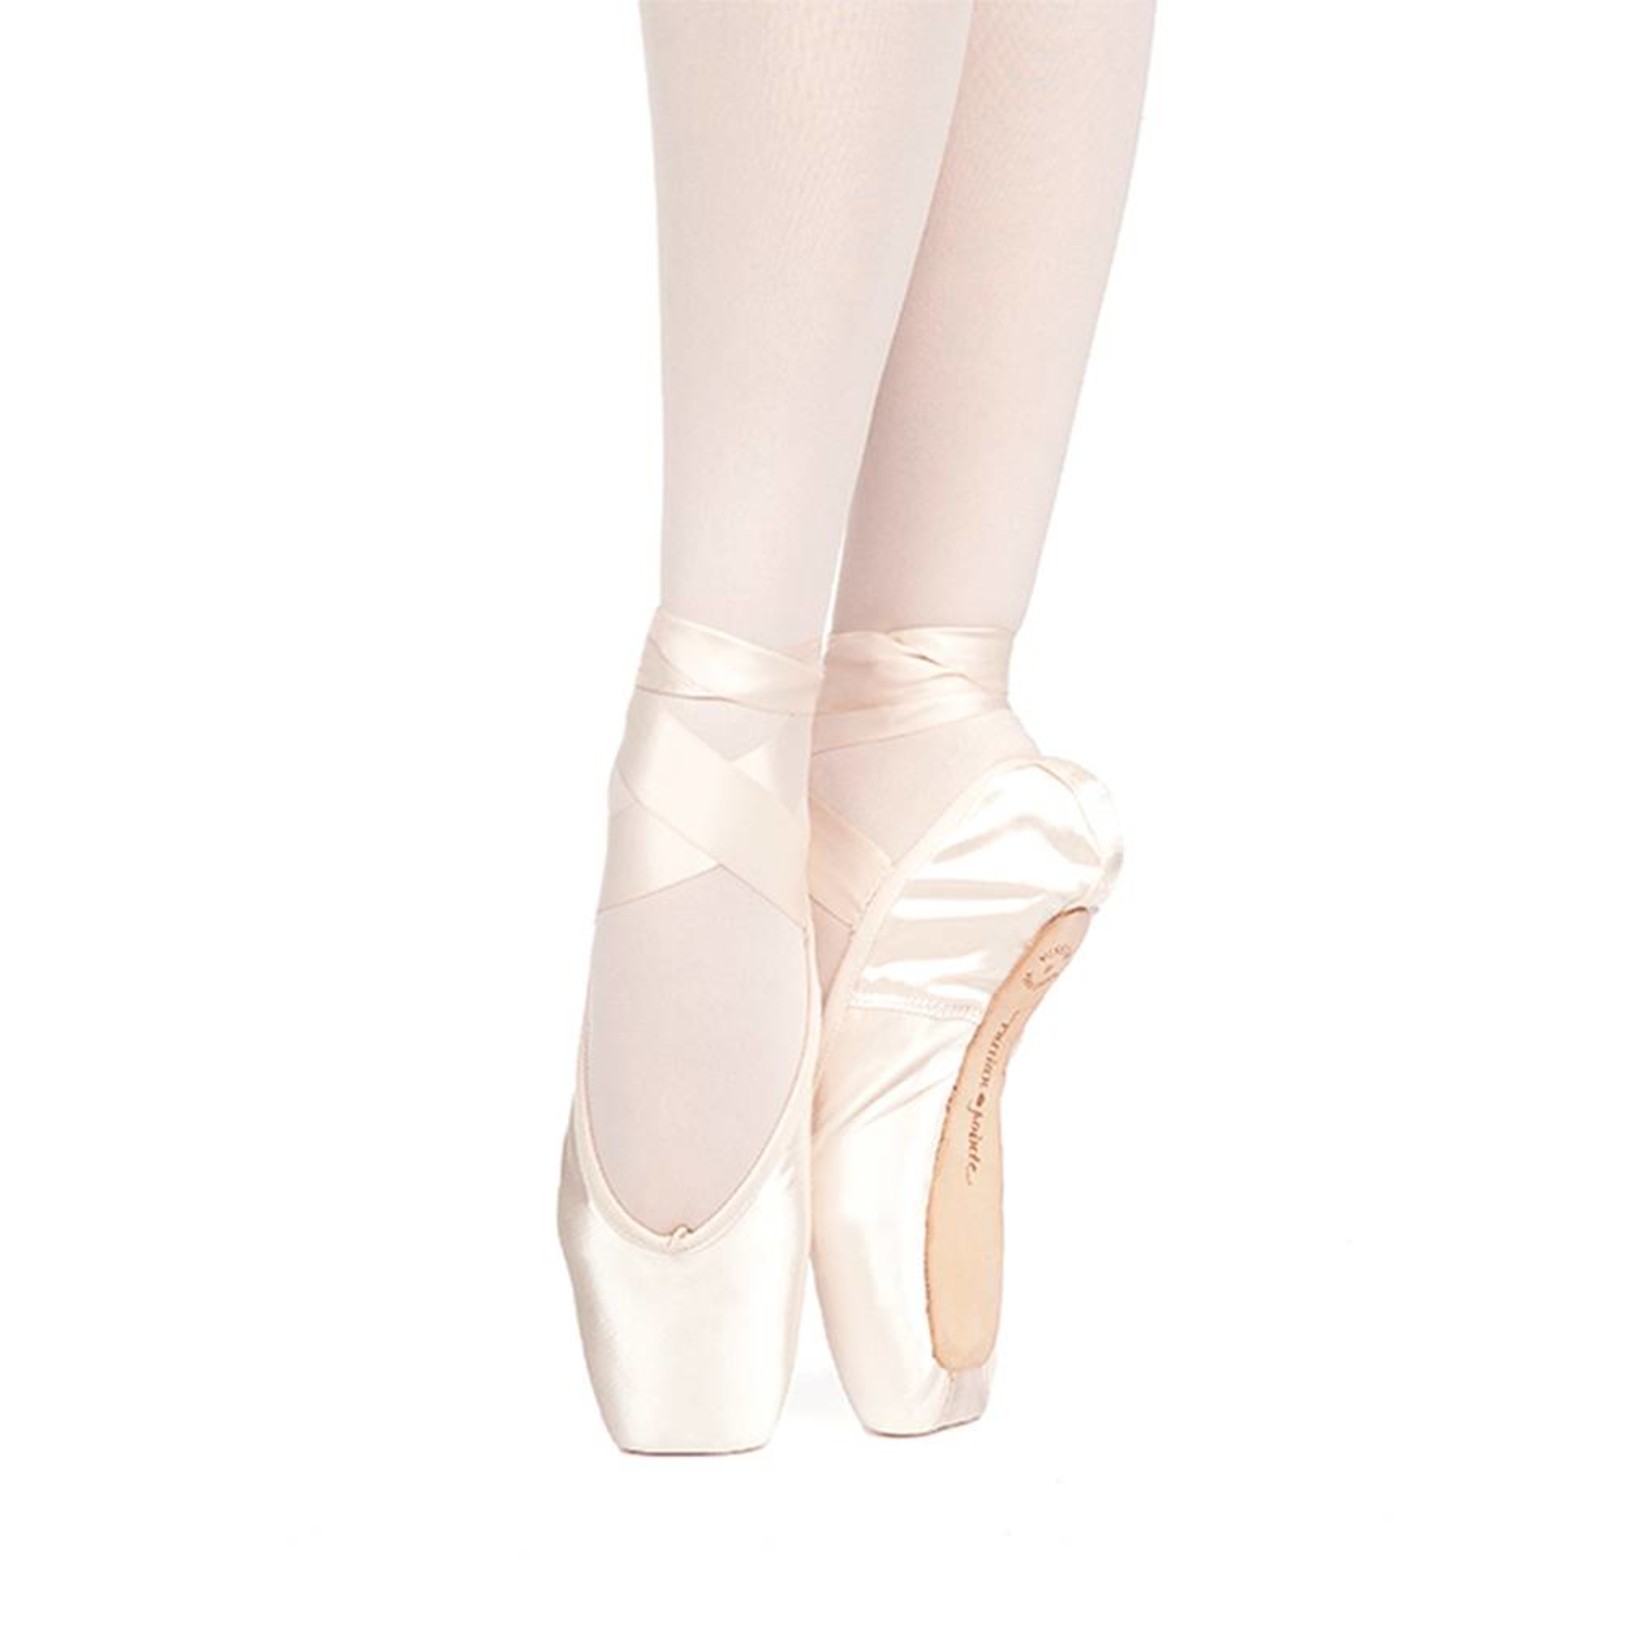 Russian Pointe Size 37: Muse U-Cut Pointe Shoes with Drawstring